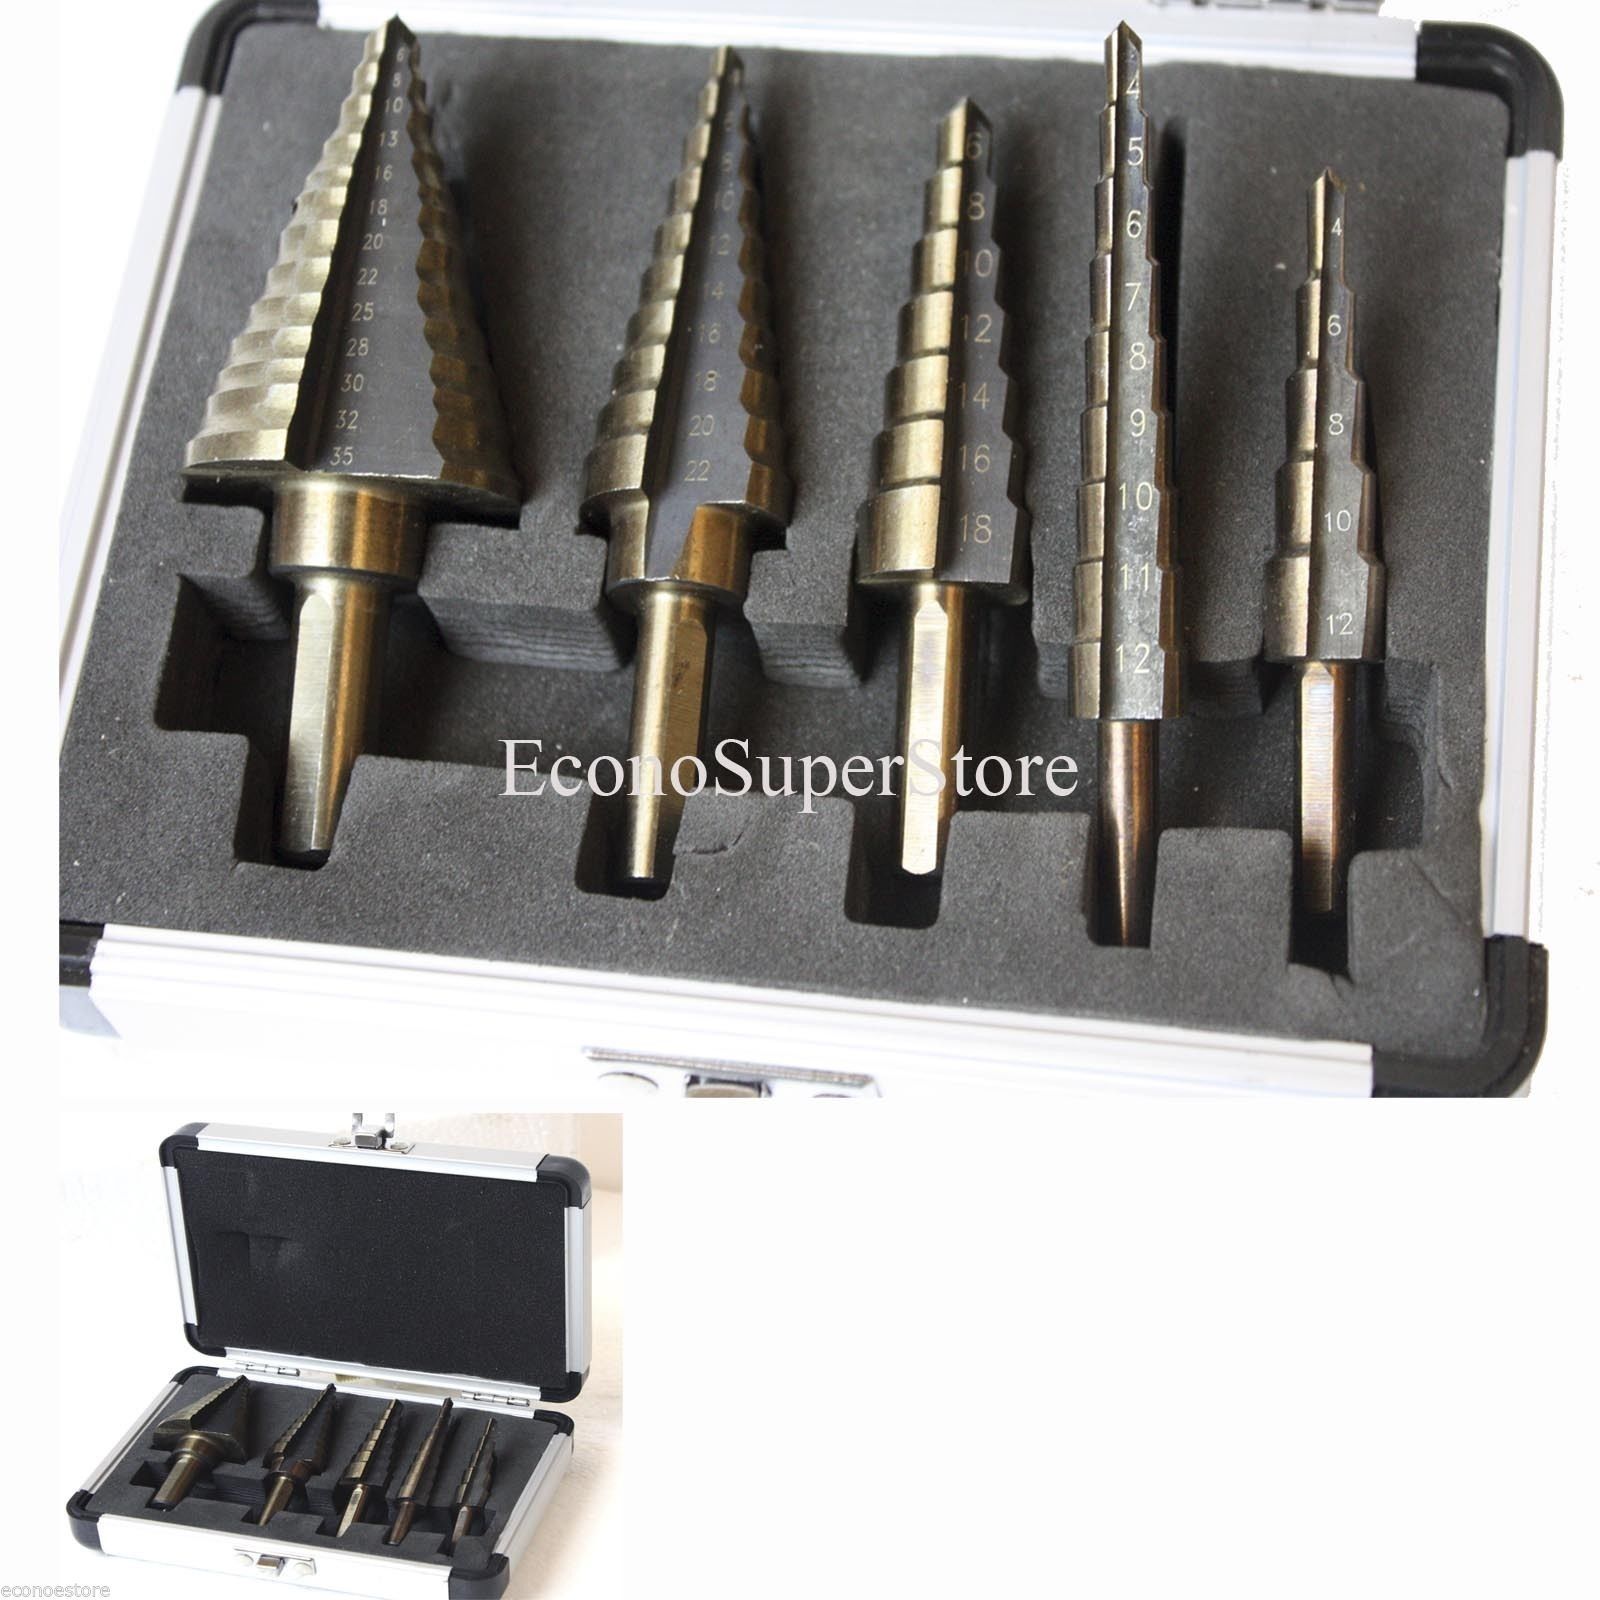 freneci 5X HSS Drill Bits HSS Titanium Coated Spiral Grooved Step Drill Set Drill Bits Set,Used for Drilling Plate Aluminum Metal Wood Large Hole Drill 